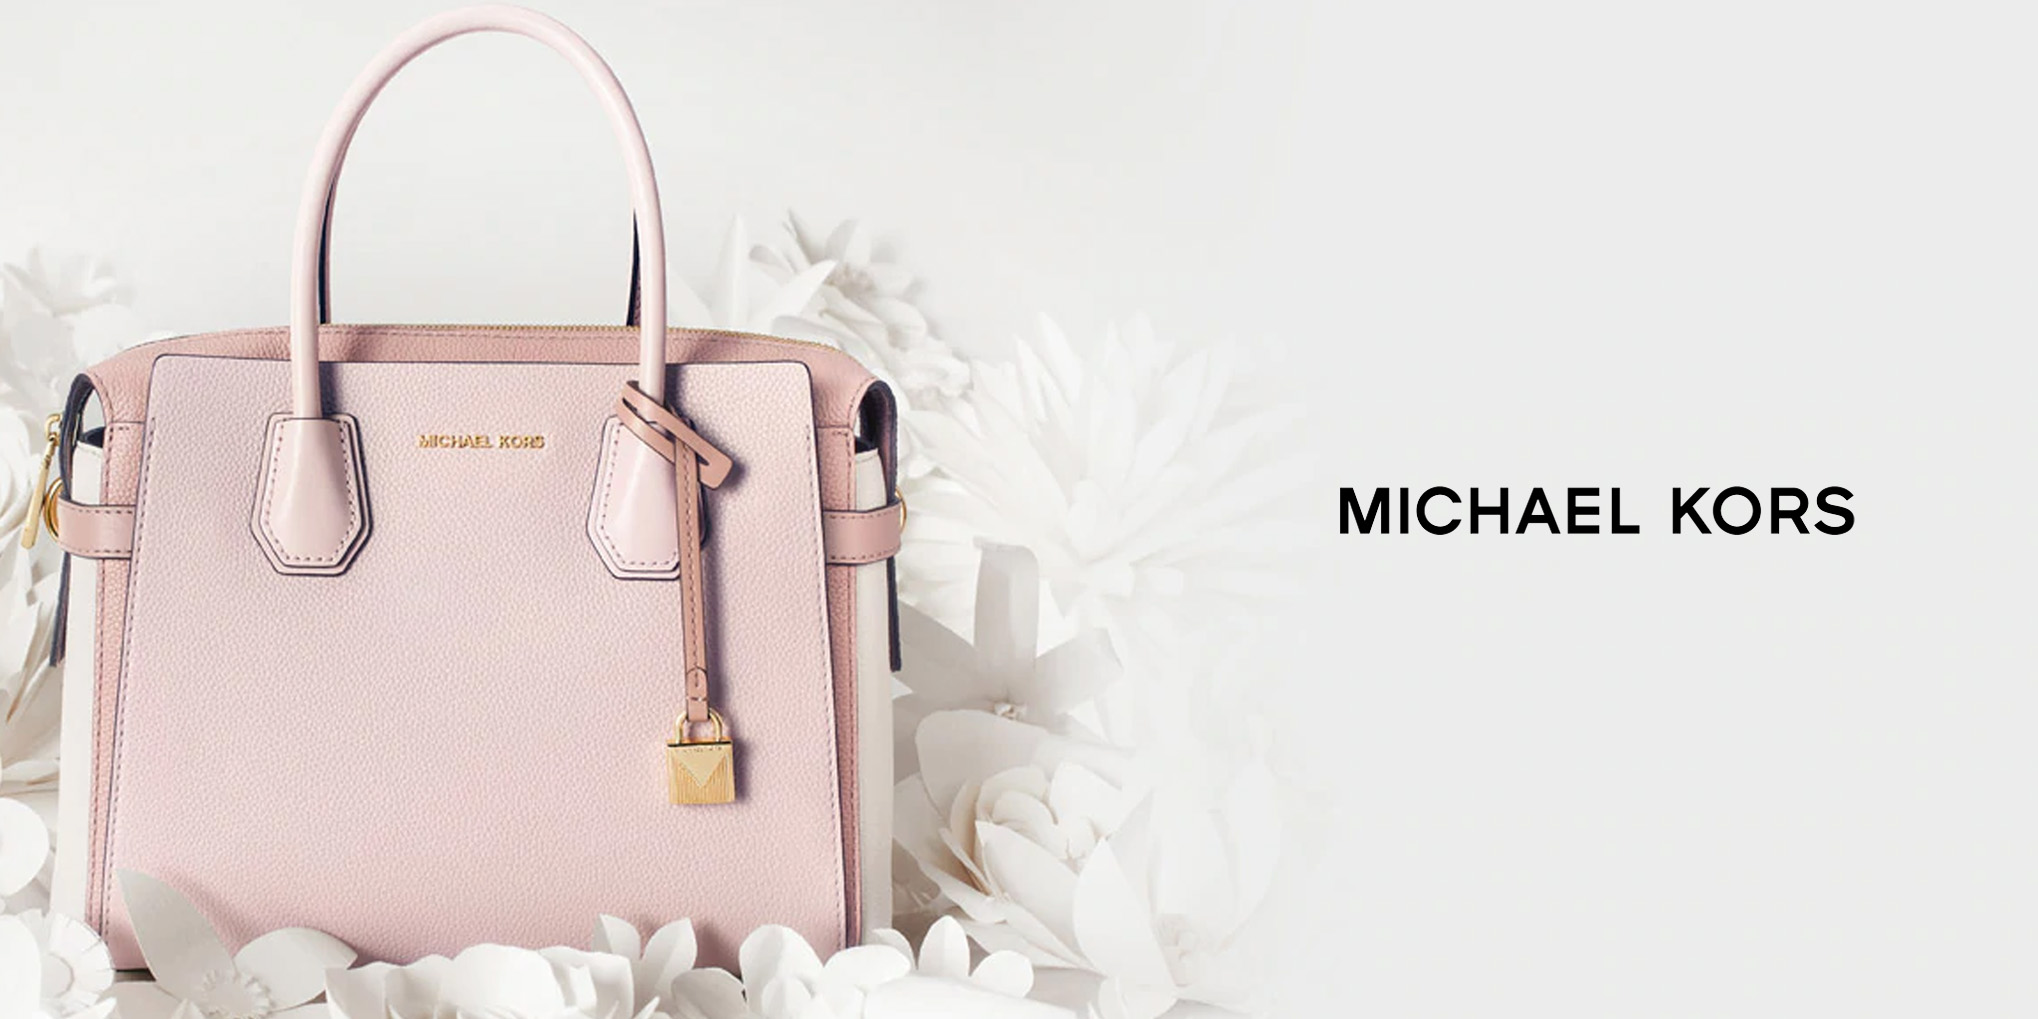 Michael Kors Mother's Day Sale offers 